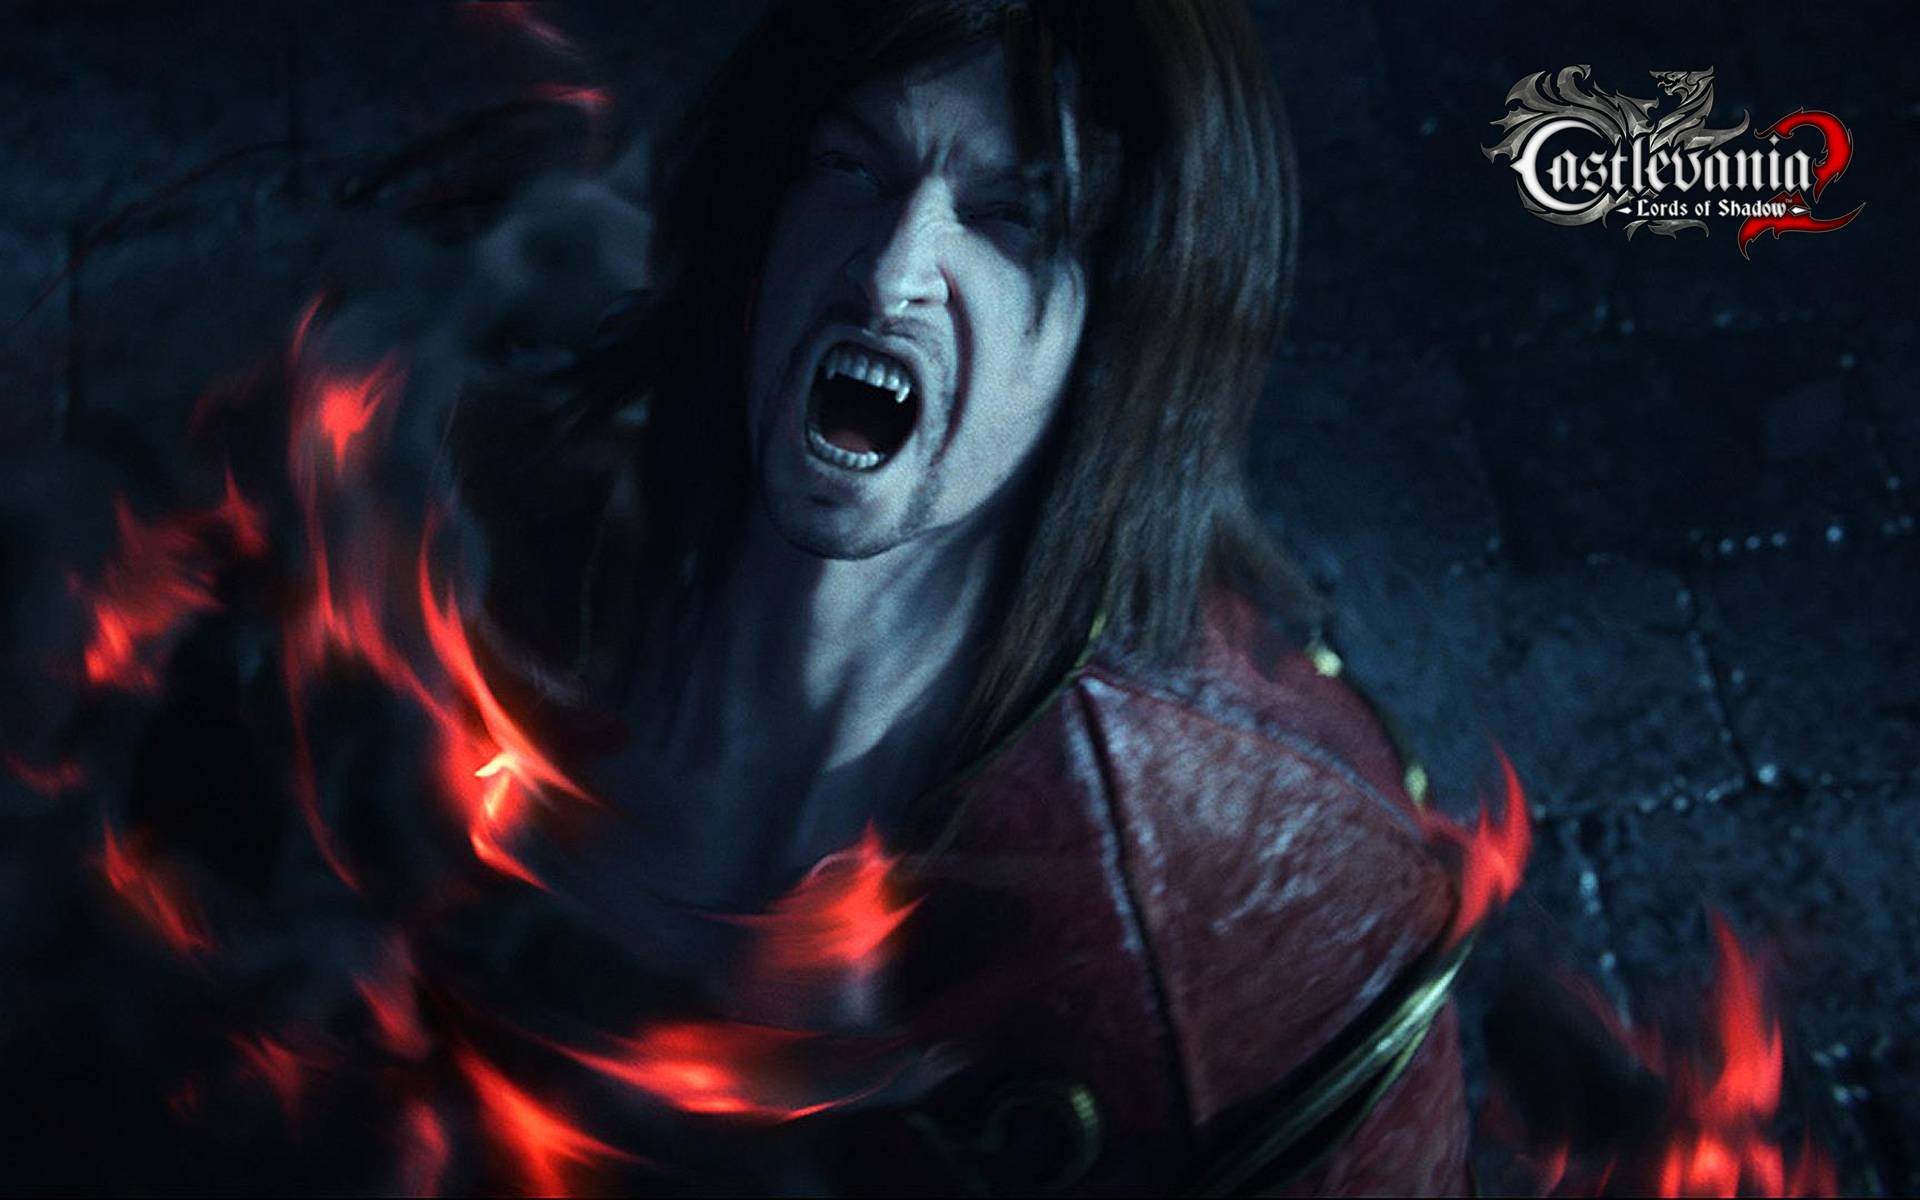 Castlevania Lords Of Shadow 2 Wallpapers in HD GamingBoltcom